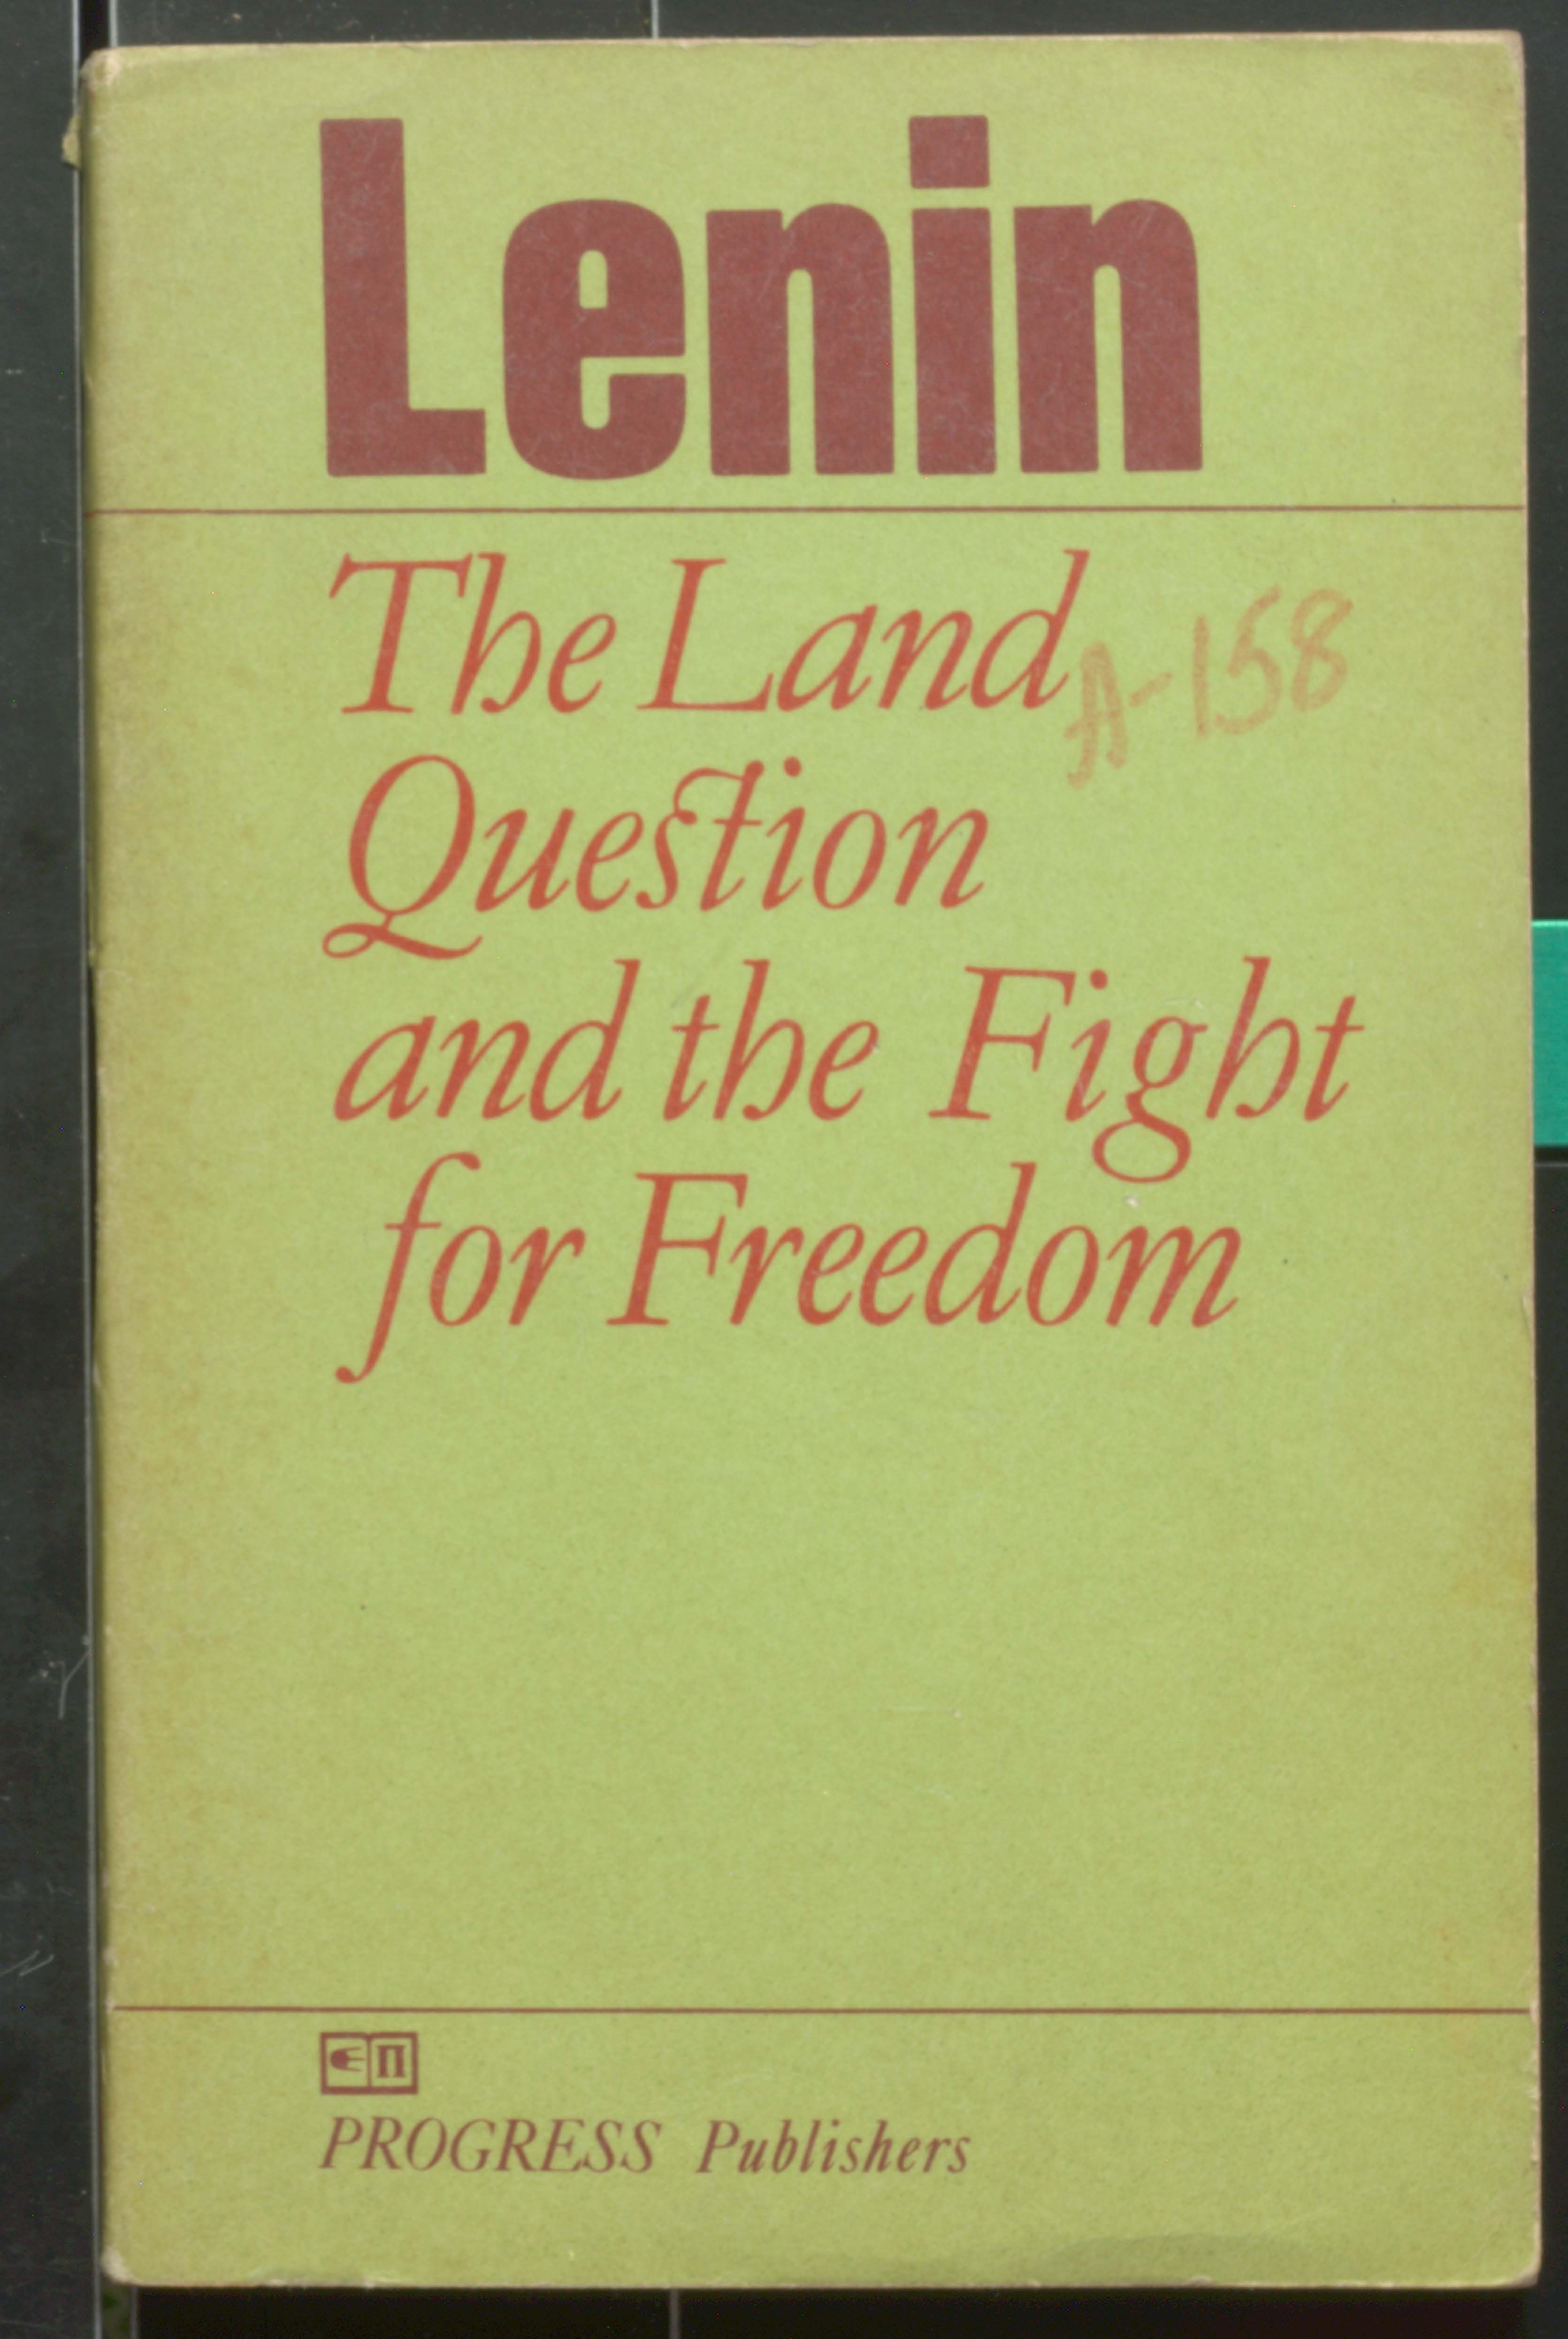 Lenin The land question and the fight for freedom